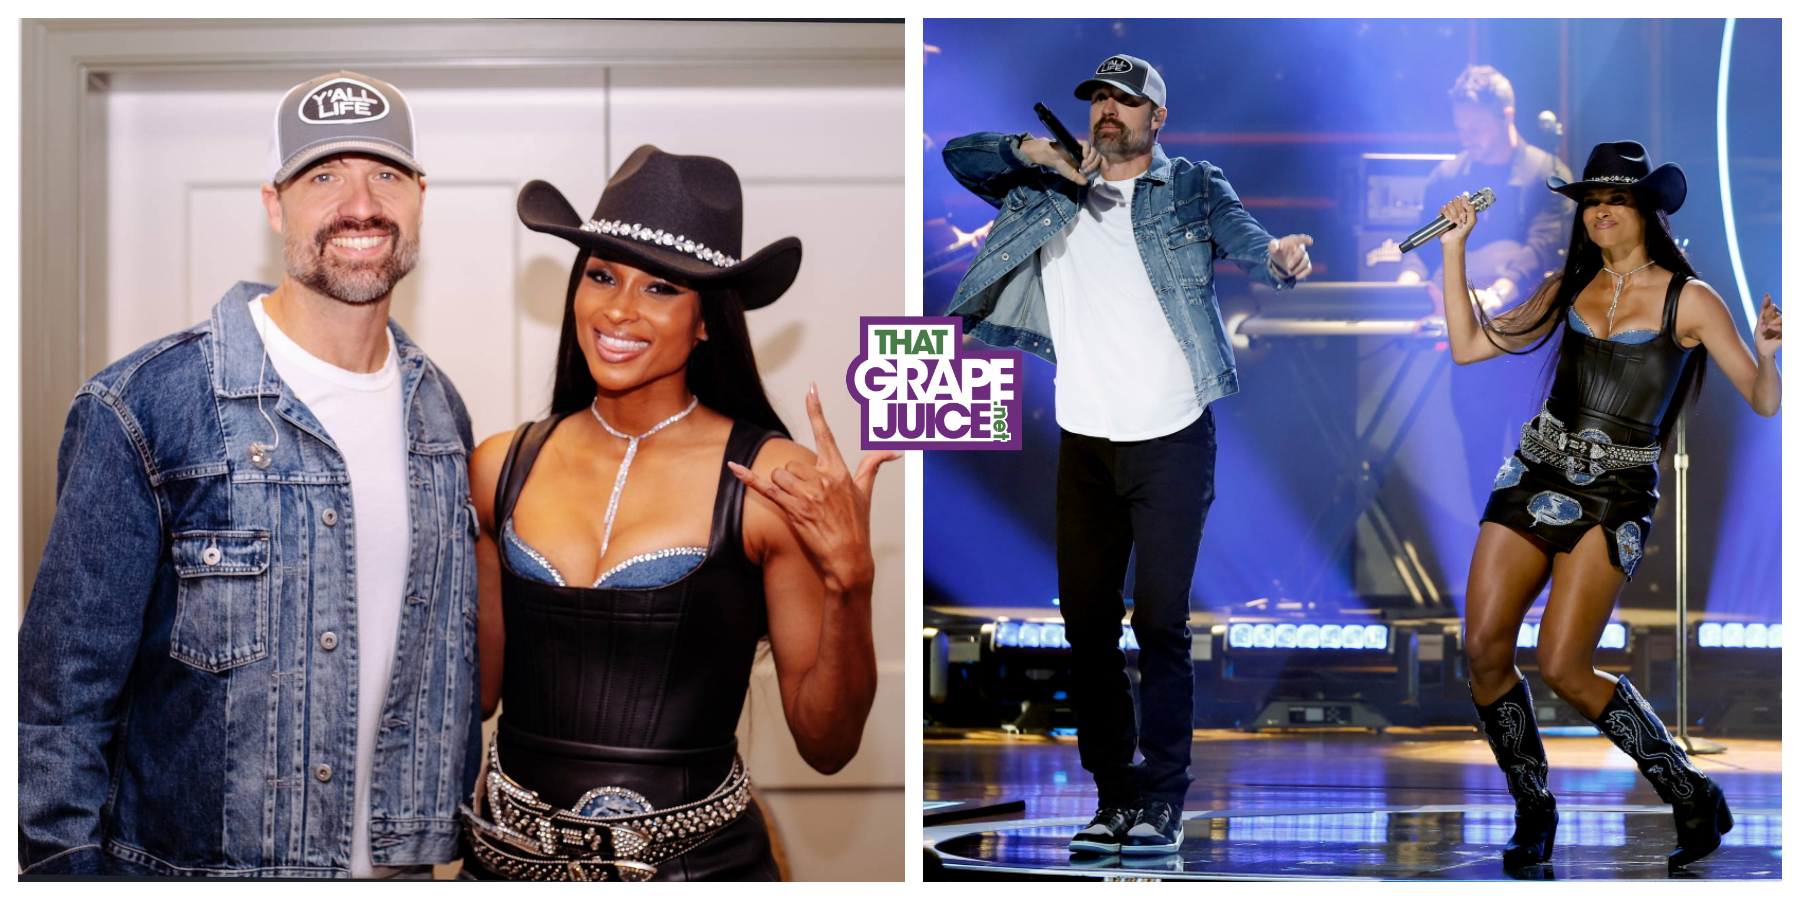 Behind the Scenes: Ciara Rocked the 2022 CMT “Artists of the Year” Show With Walker Hayes [Watch]